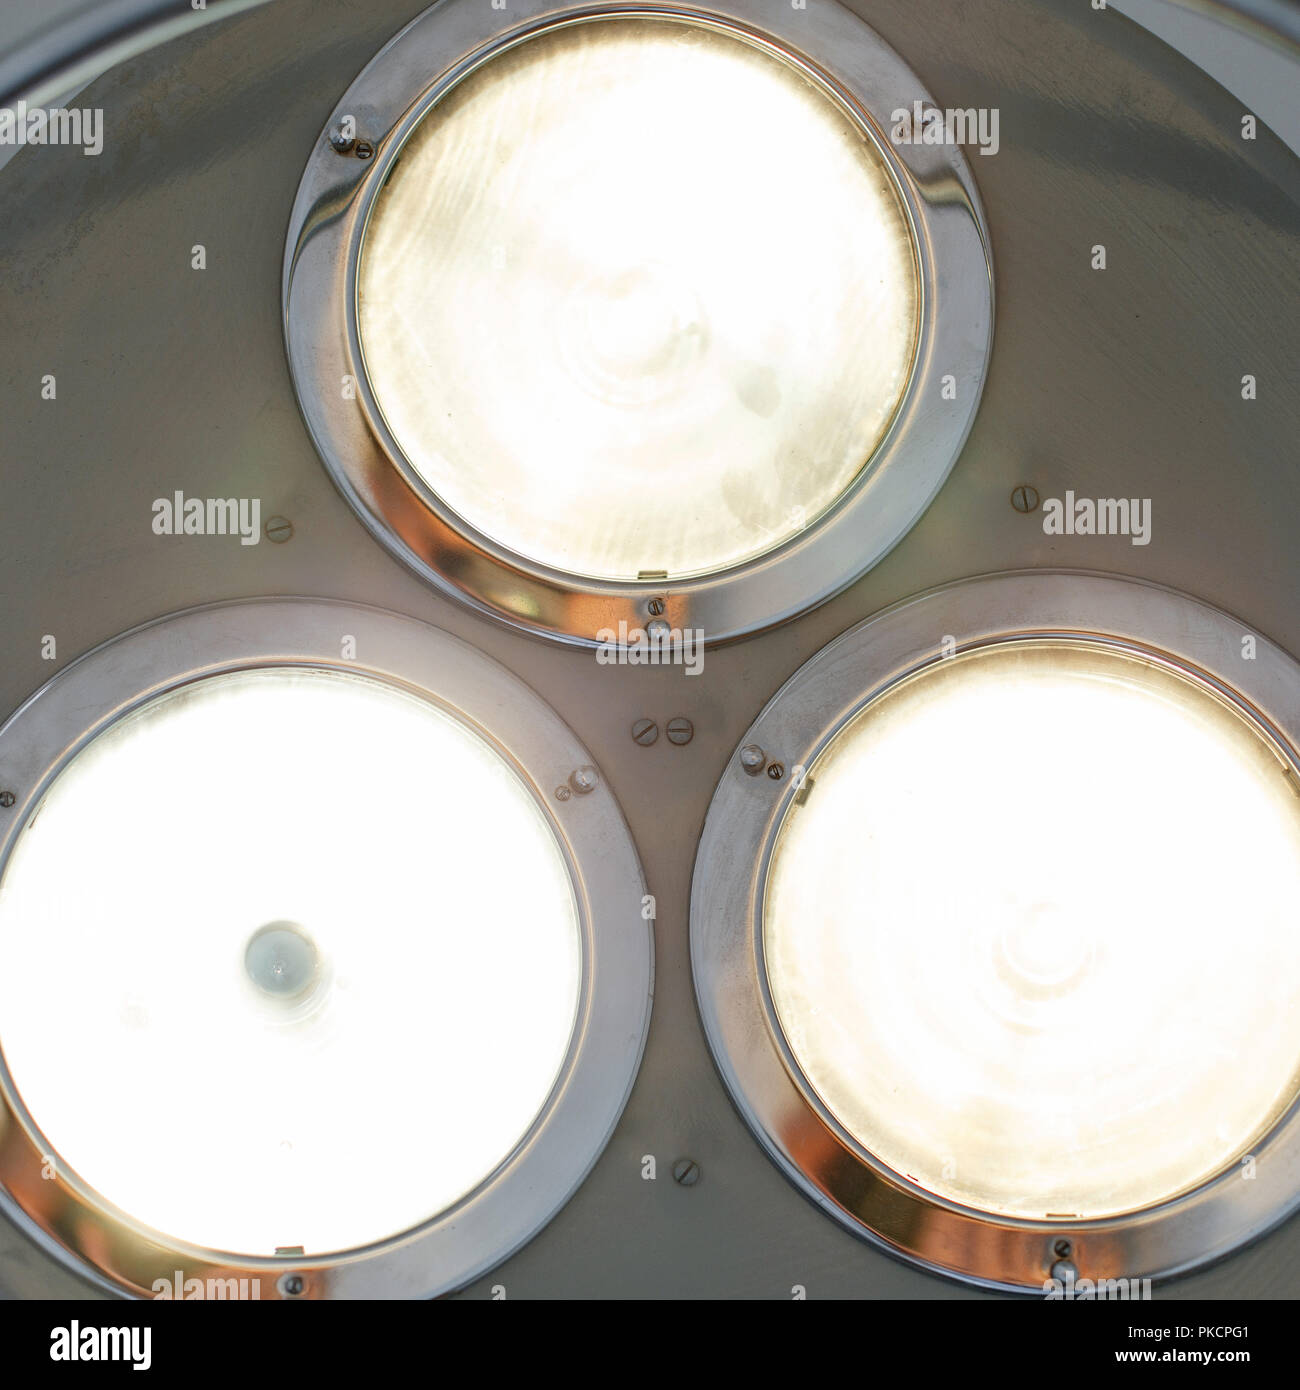 Bright light shines in the operating room. Metal surgical lamp. Stock Photo